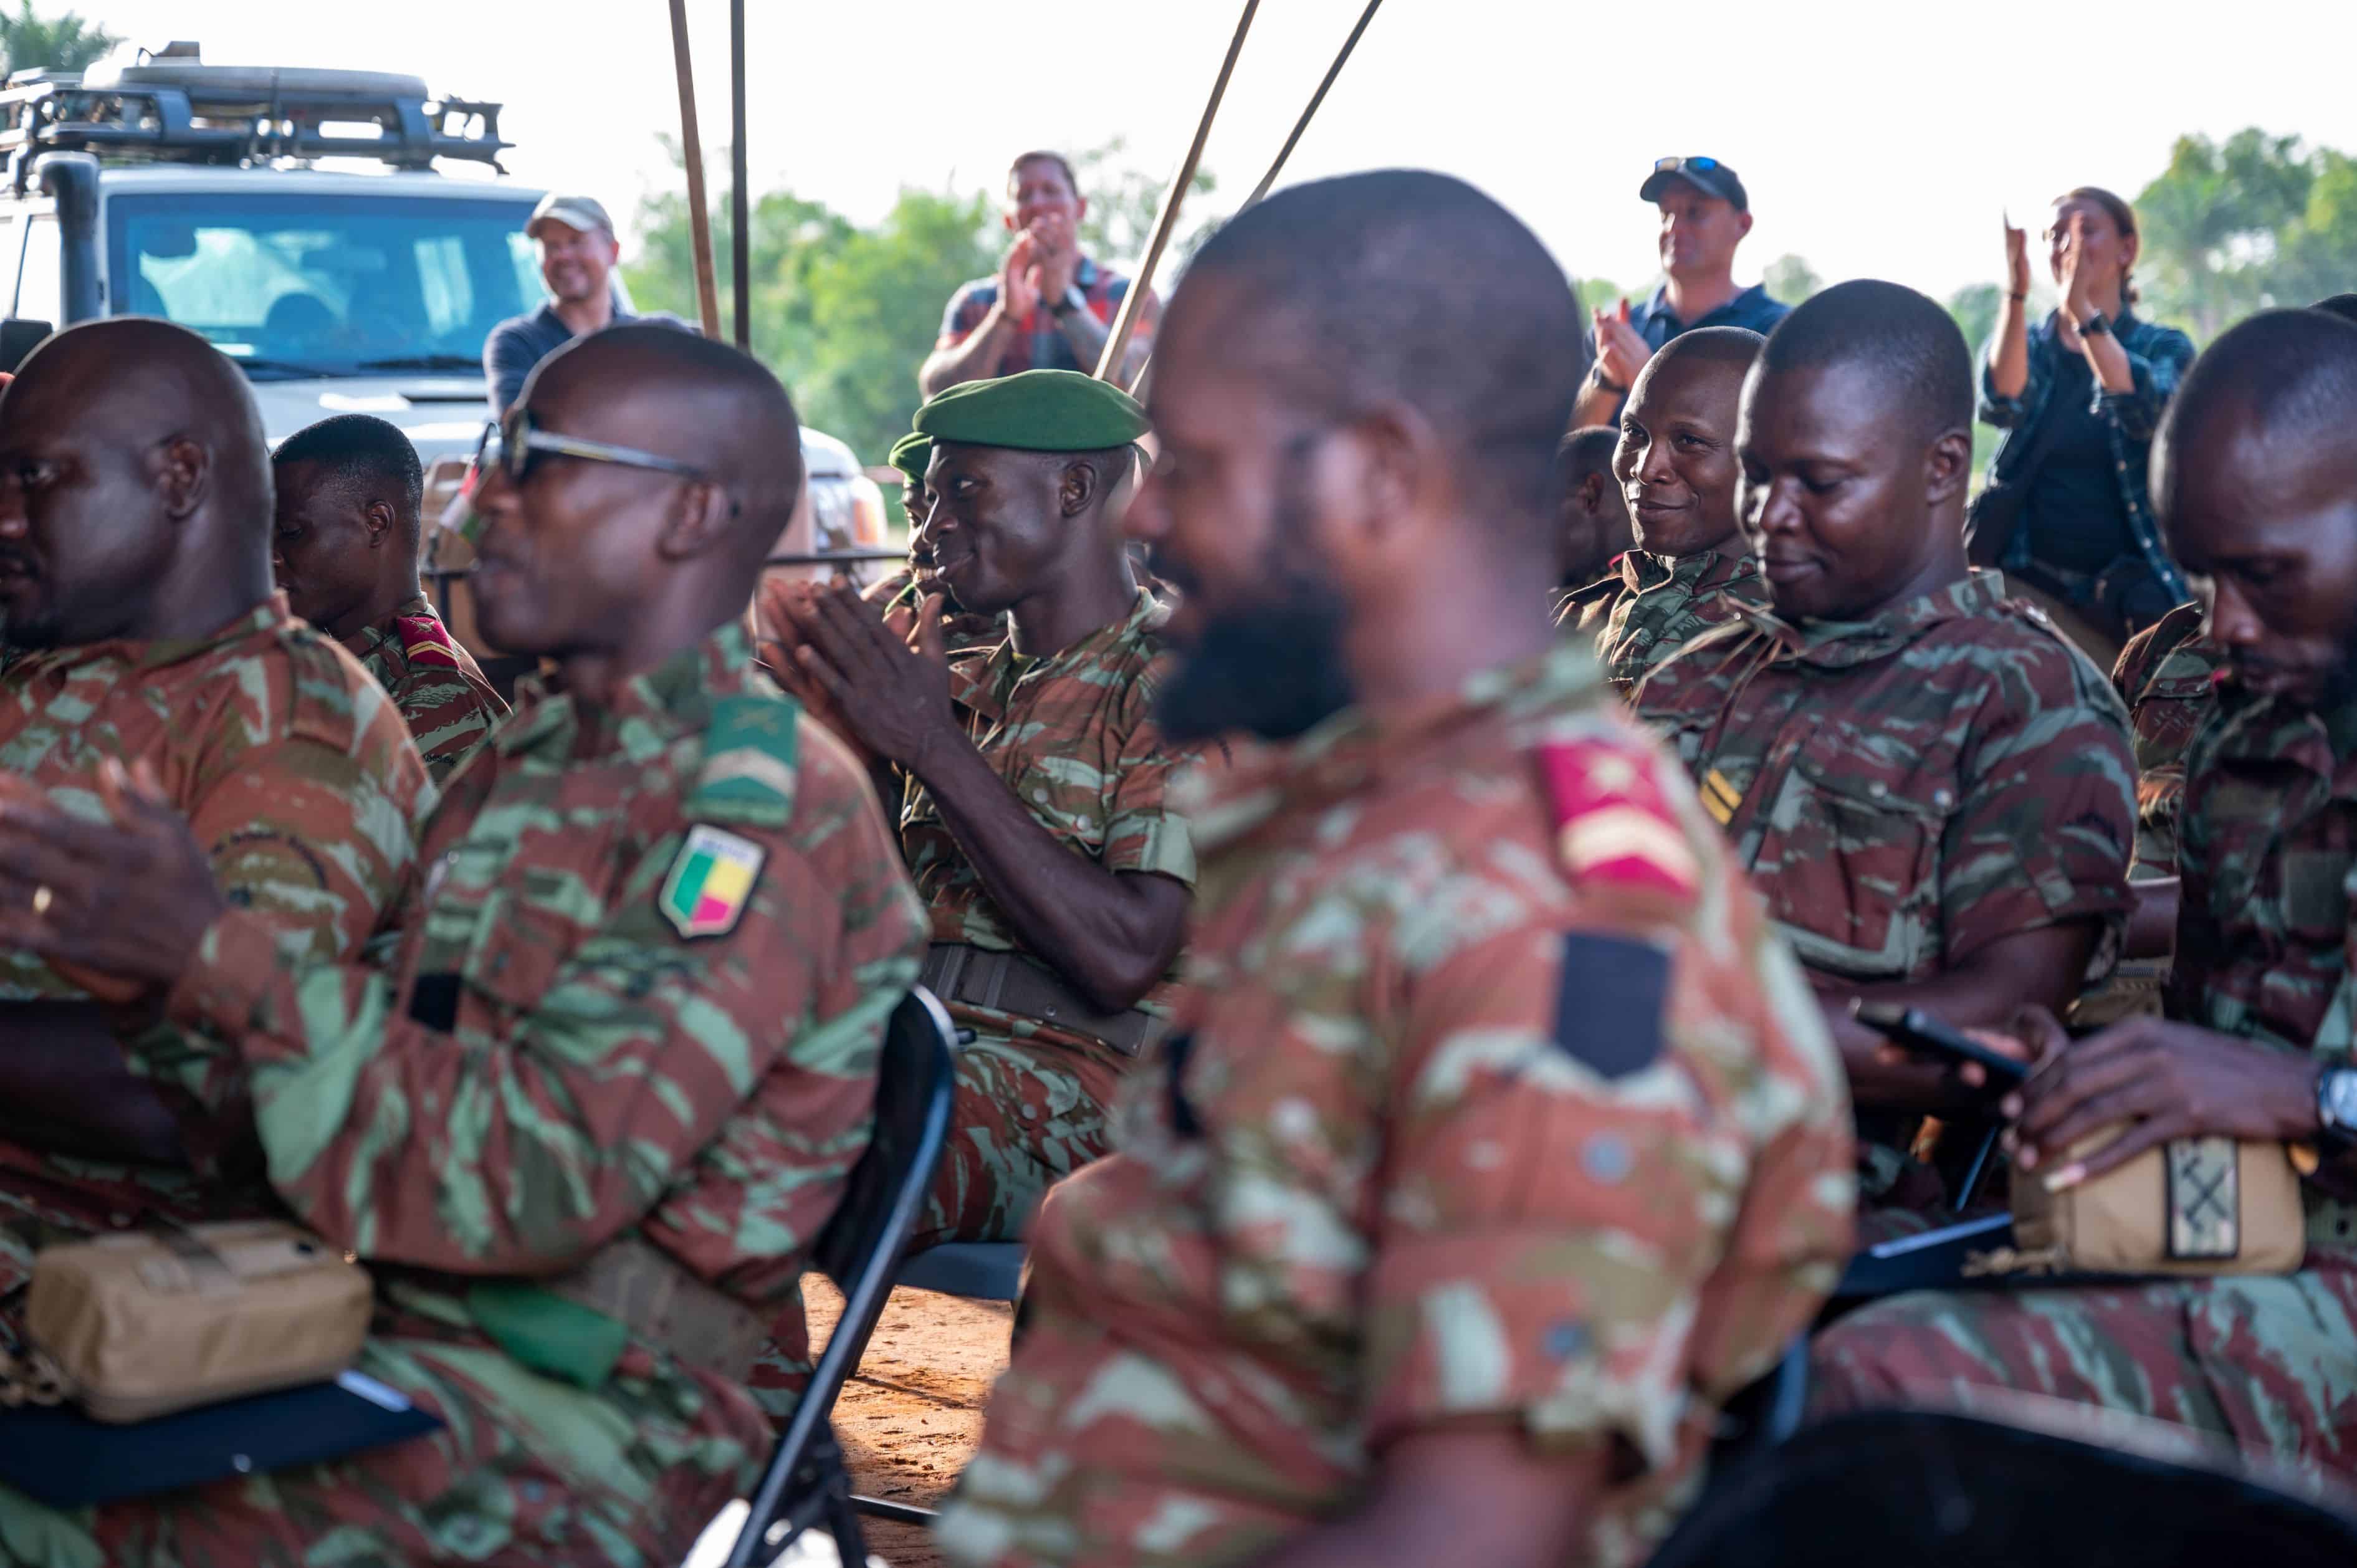 Benin Armed Forces soldiers applaud during a graduation ceremony for members that participated in a Civil Affairs Joint Combined Exchange Training